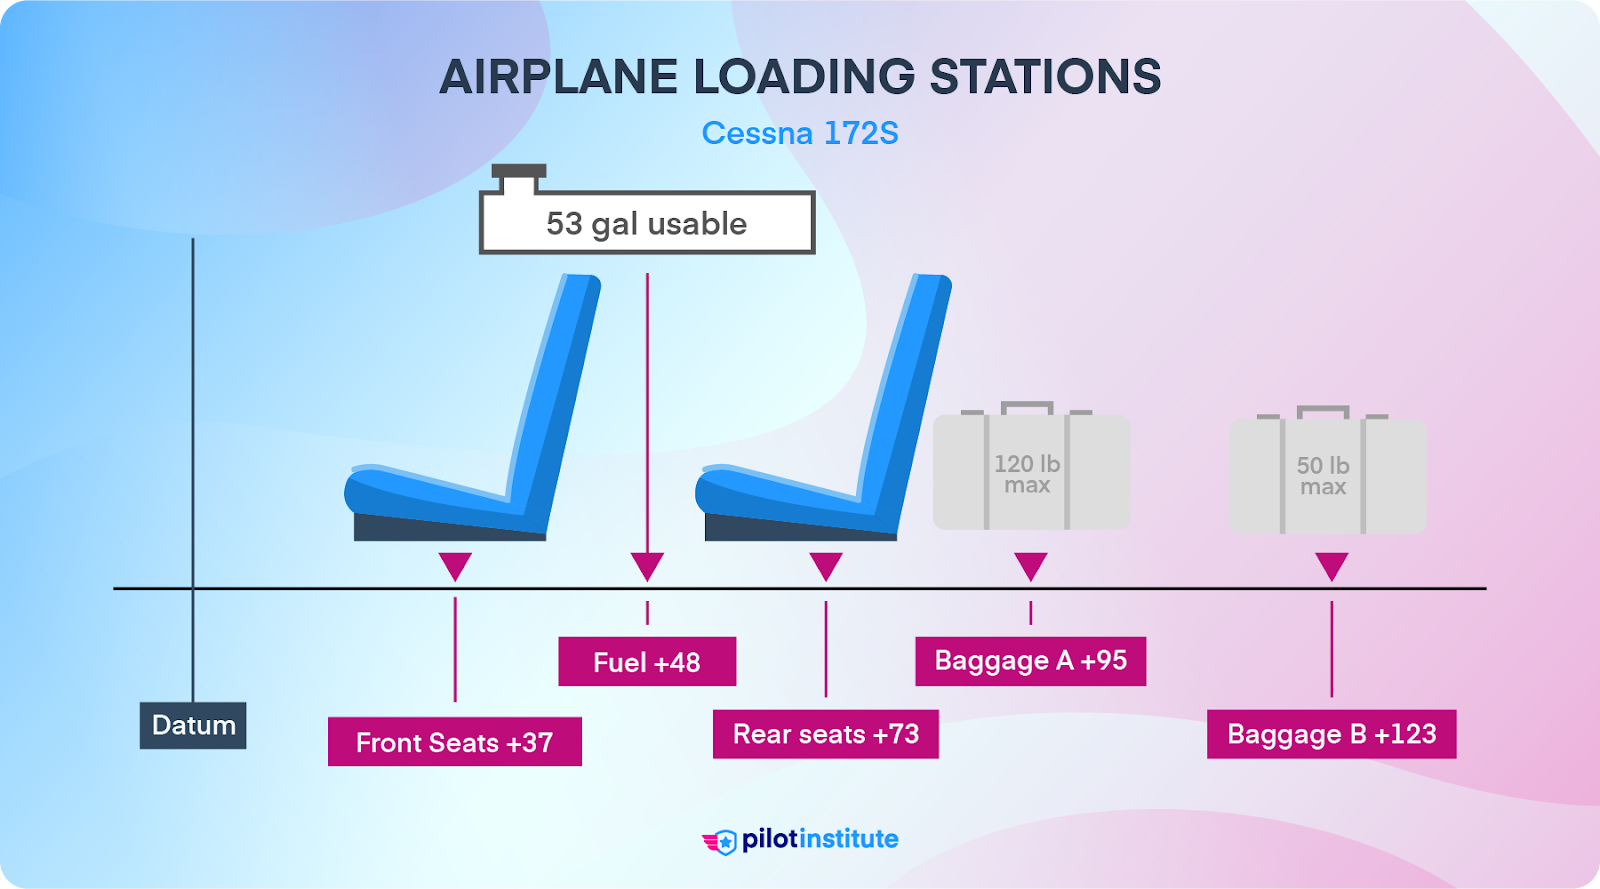 The loading stations of a Cessna 172S.